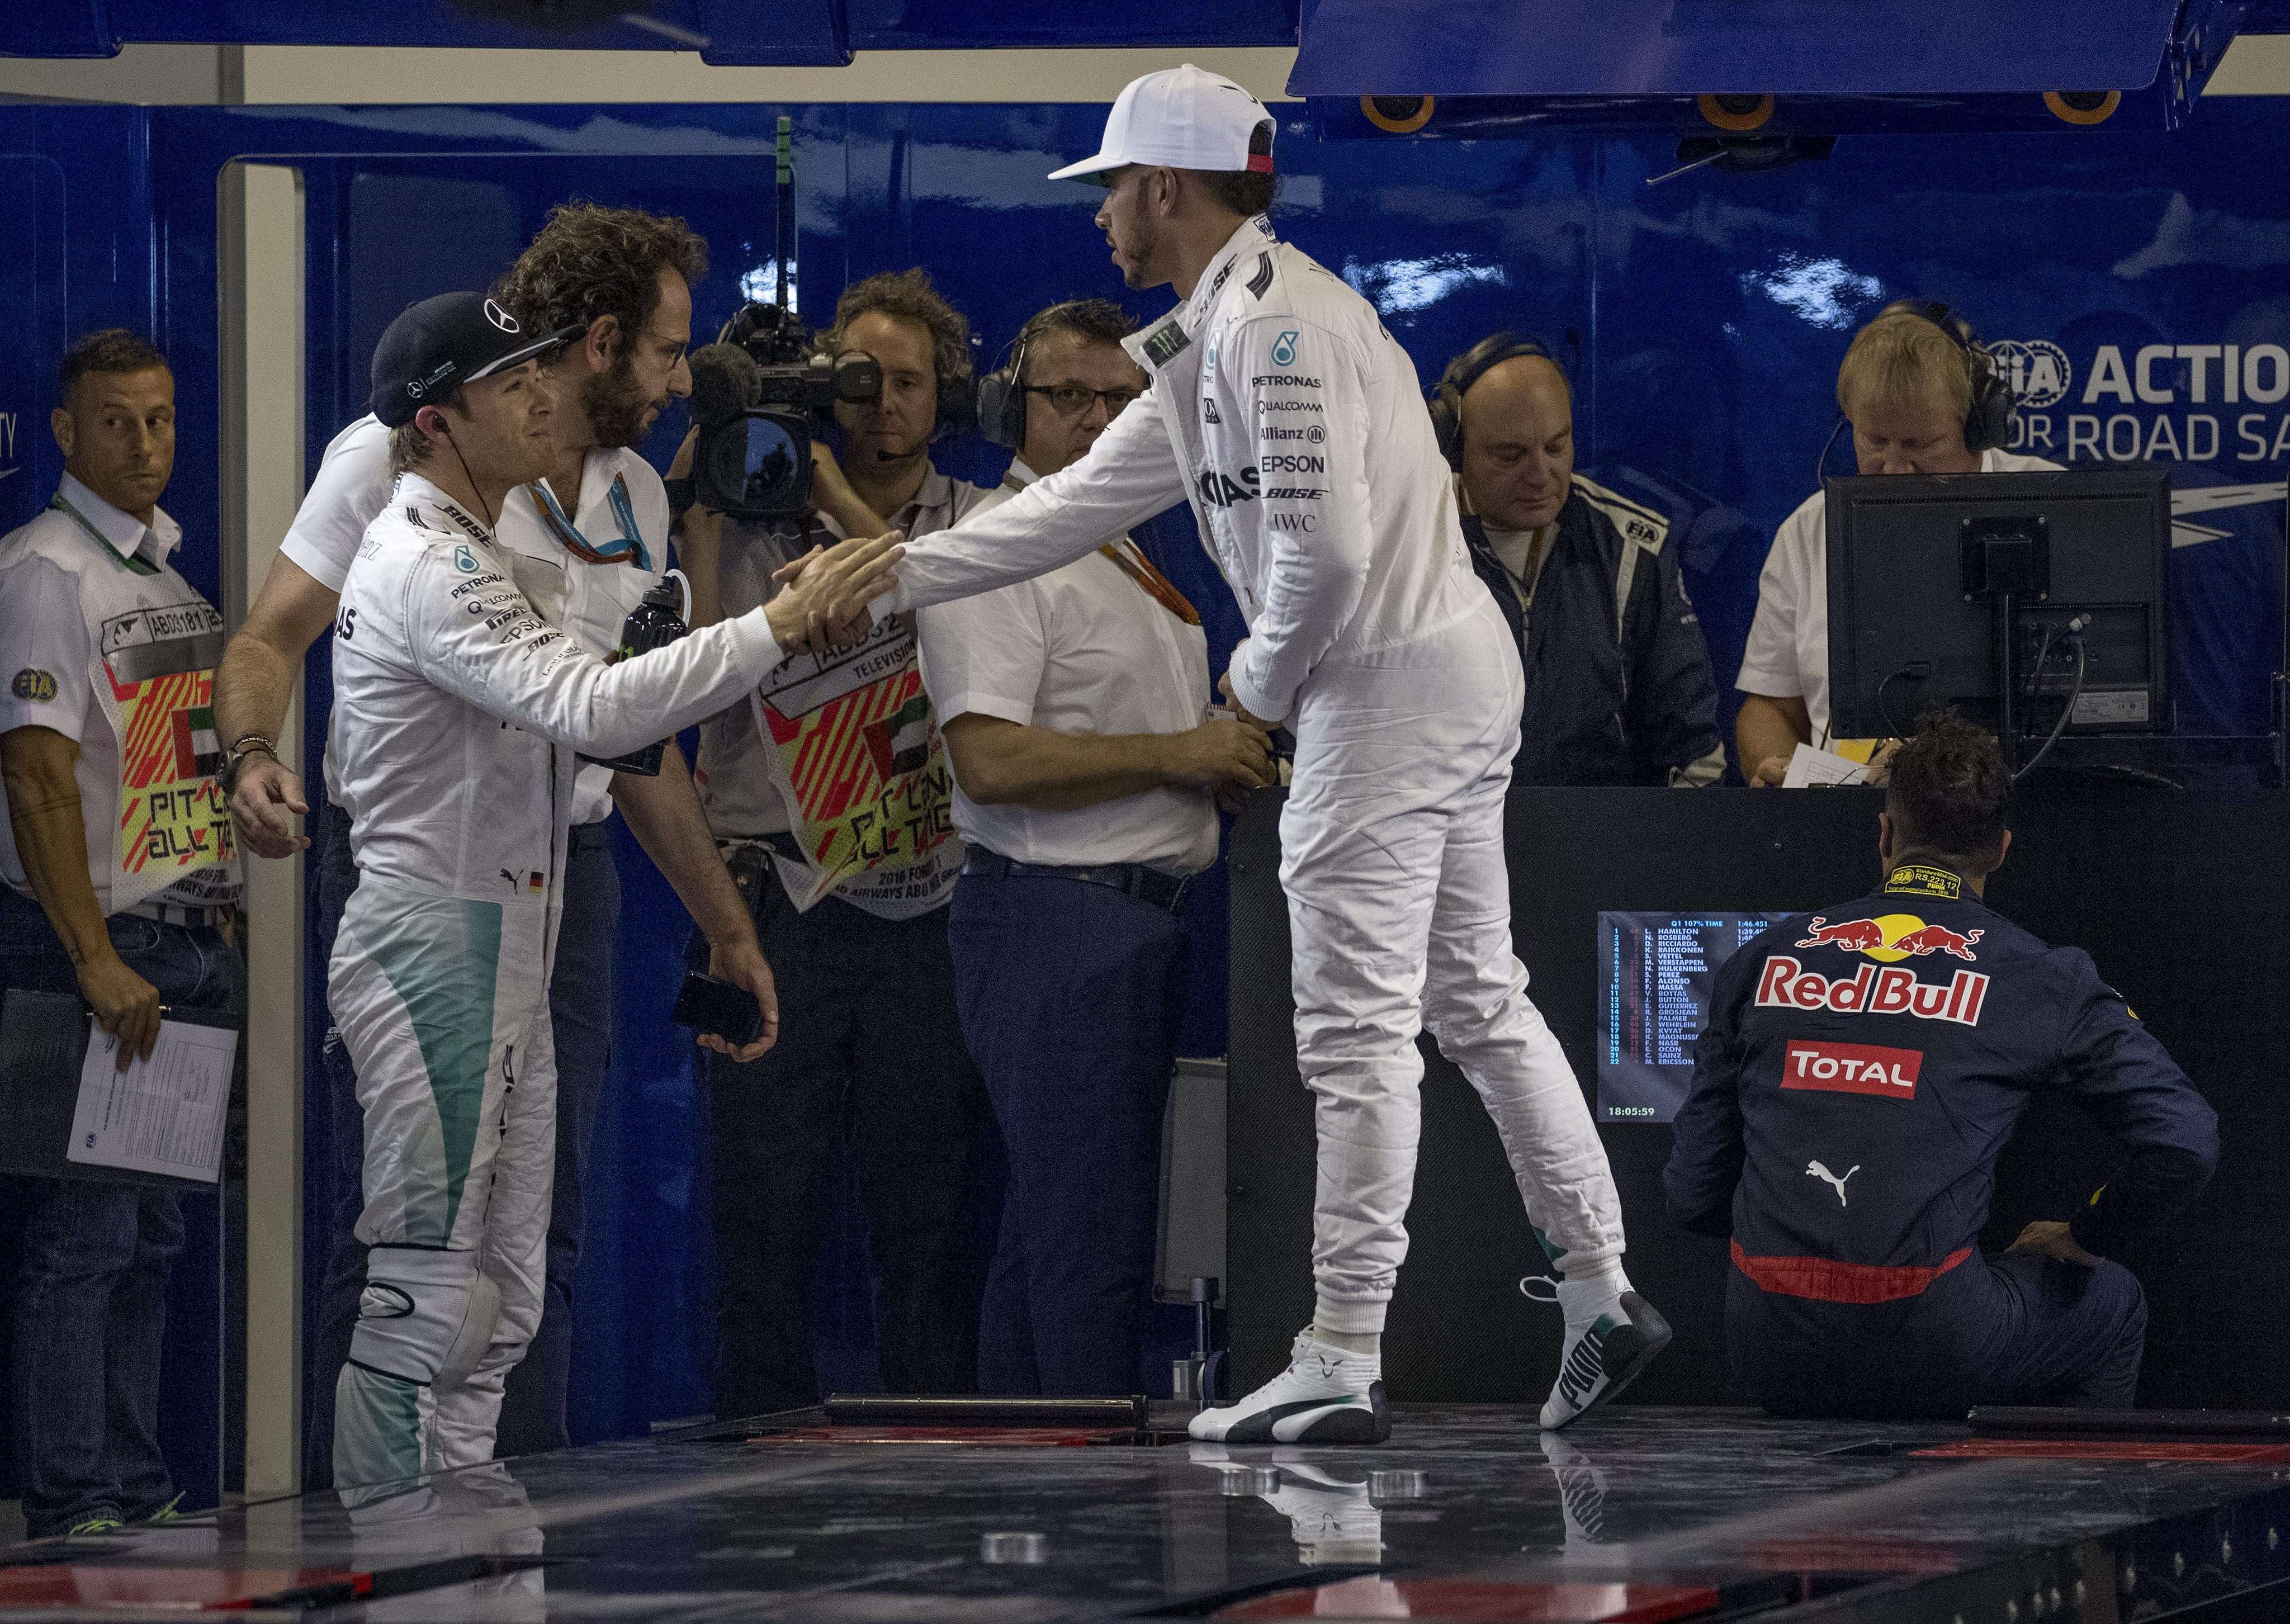 Mercedes teammates Nico Rosberg (left) and Lewis Hamilton shake hands after qualifying for the Abu Dhabi Grand Prix. Photo: EPA